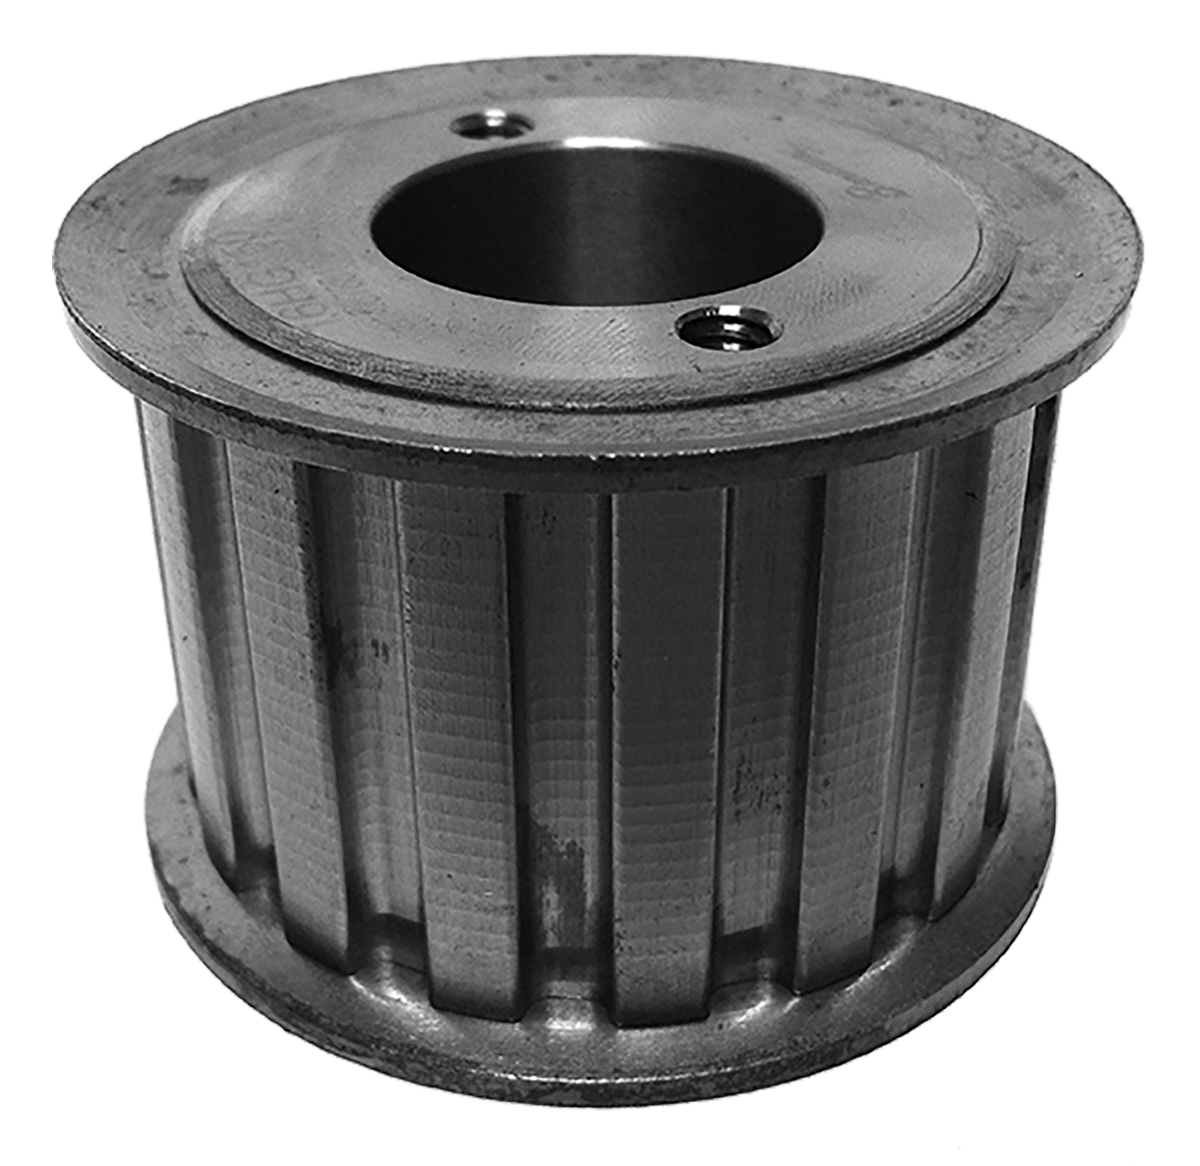 14HG150 - Steel Imperial Pitch Pulleys